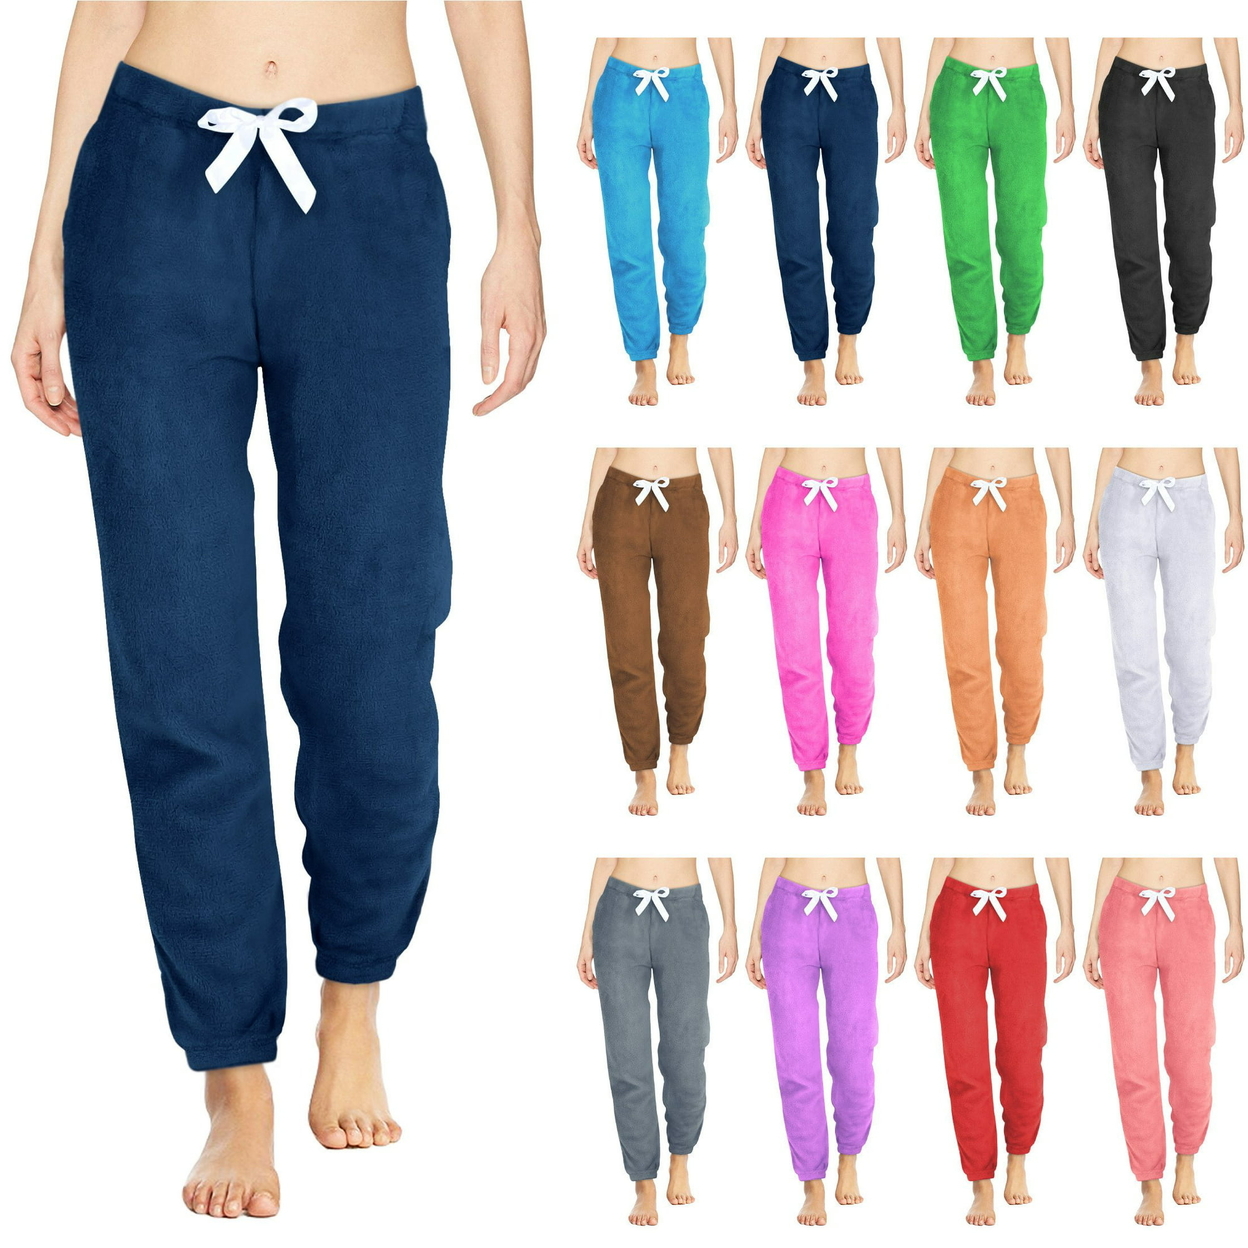 Multi-Pack: Women's Solid & Printed Ultra-Soft Comfy Stretch Micro-Fleece Pajama Lounge Pants - 1-pack, Xx-large, Love